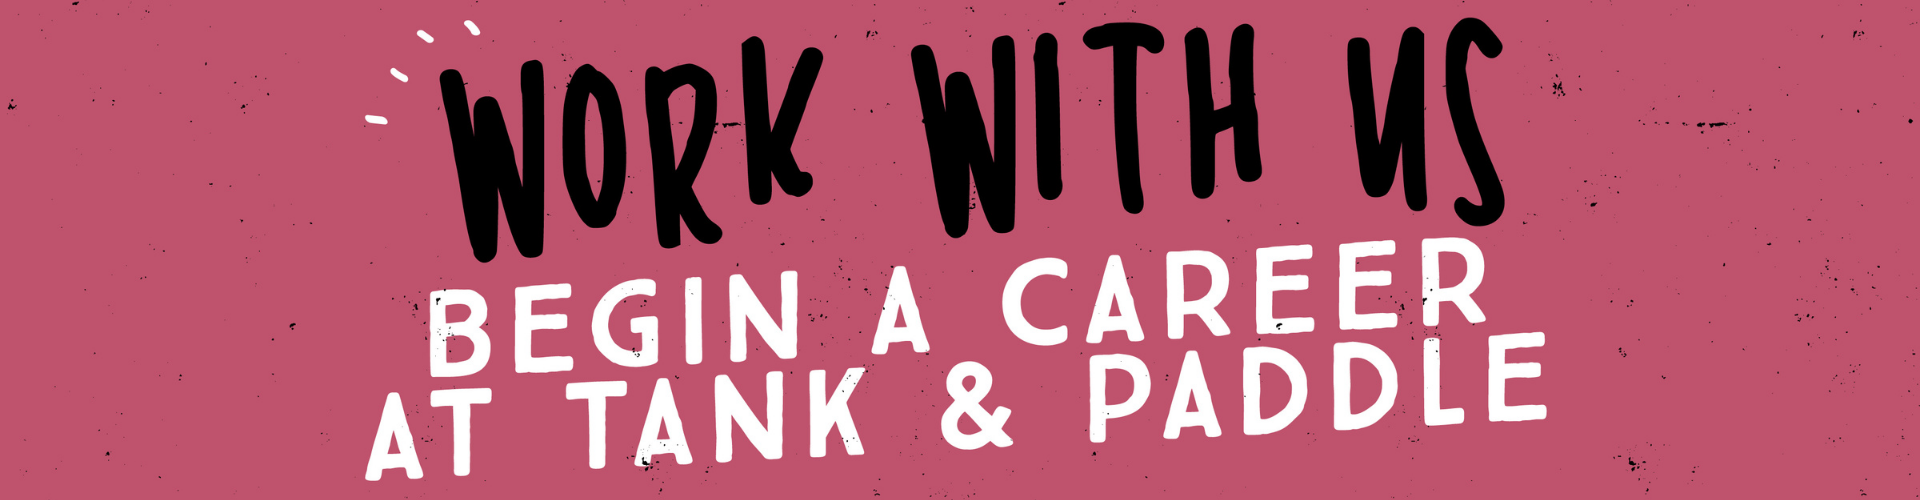 Work With Us - Begin a Career at Tank & Paddle